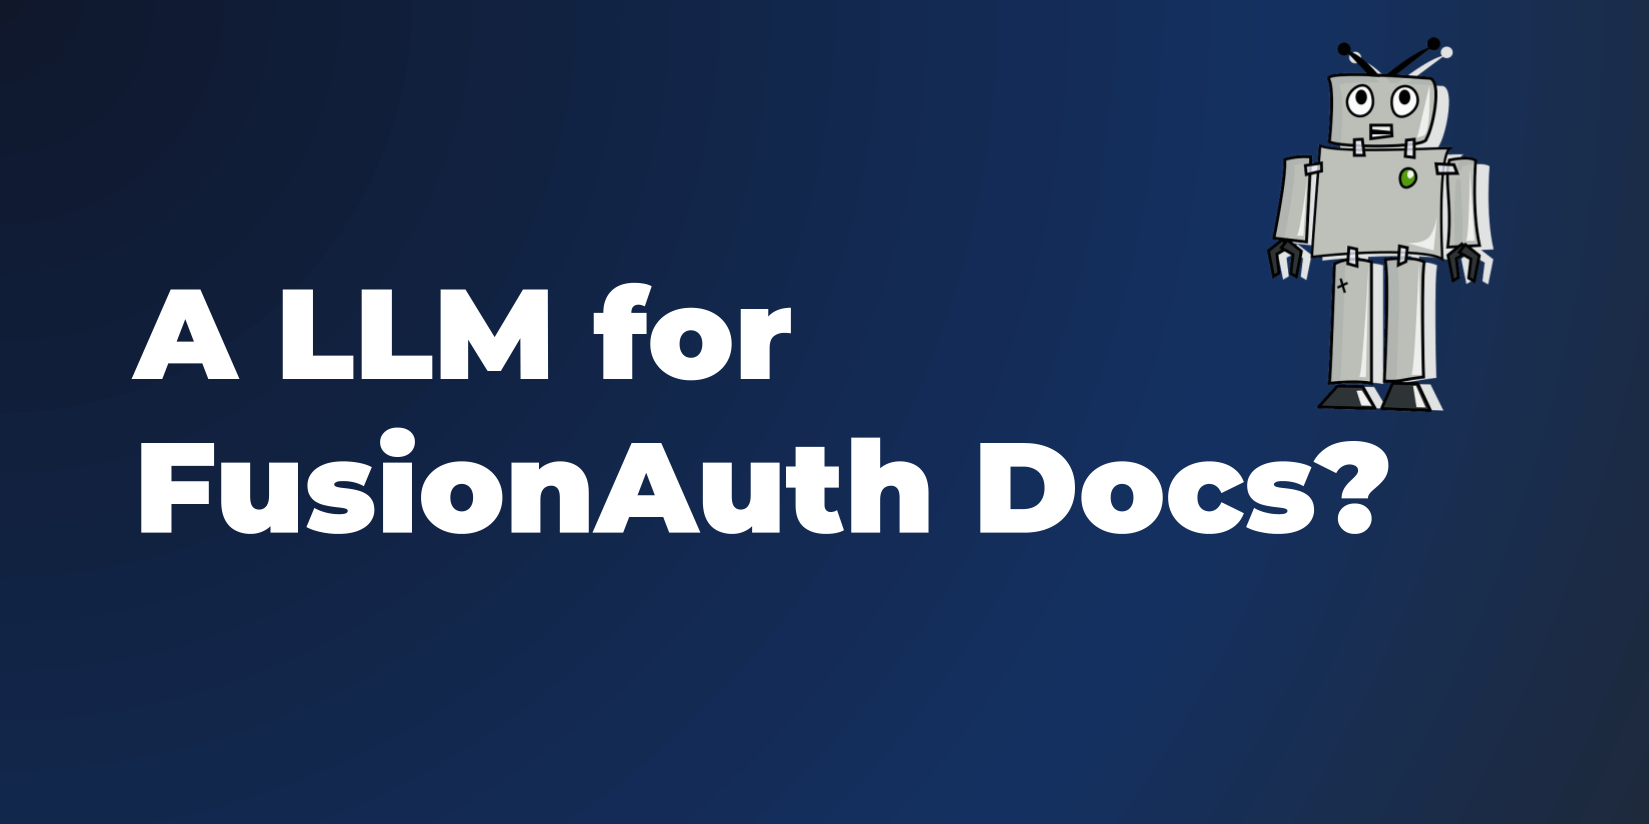 Searching FusionAuth docs using an LLM